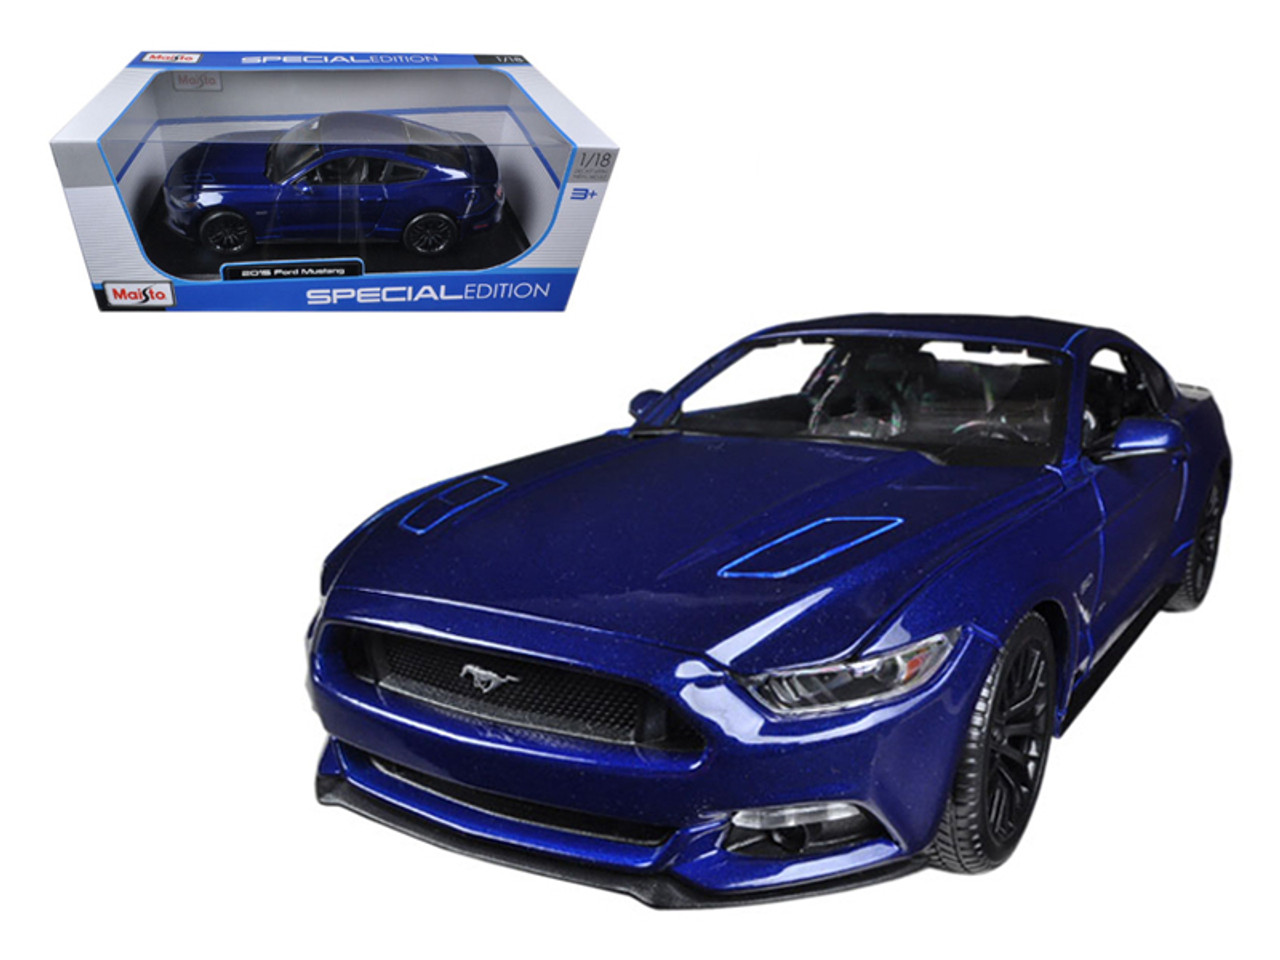 2015 Ford Mustang GT 5.0 Blue Metallic 1/18 Diecast Model Car by Maisto